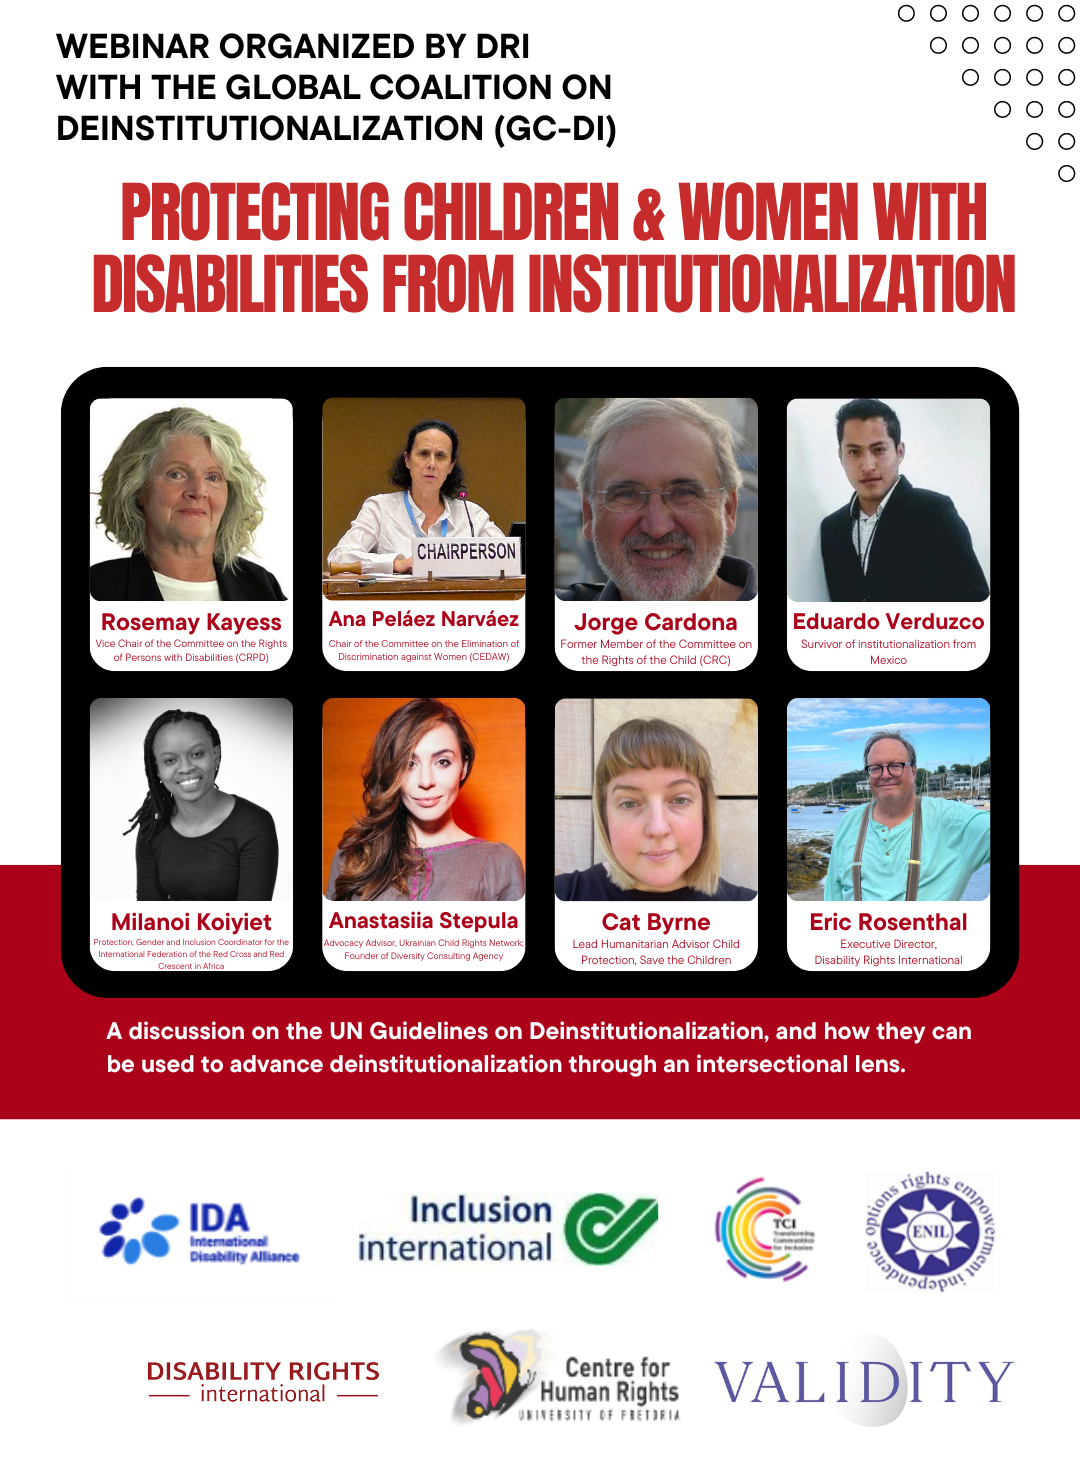 Webinar organized by DRI with the Global Coalition on Deinstitutionalization "Protecting Children and Women with Disabilities from Institutionalization"